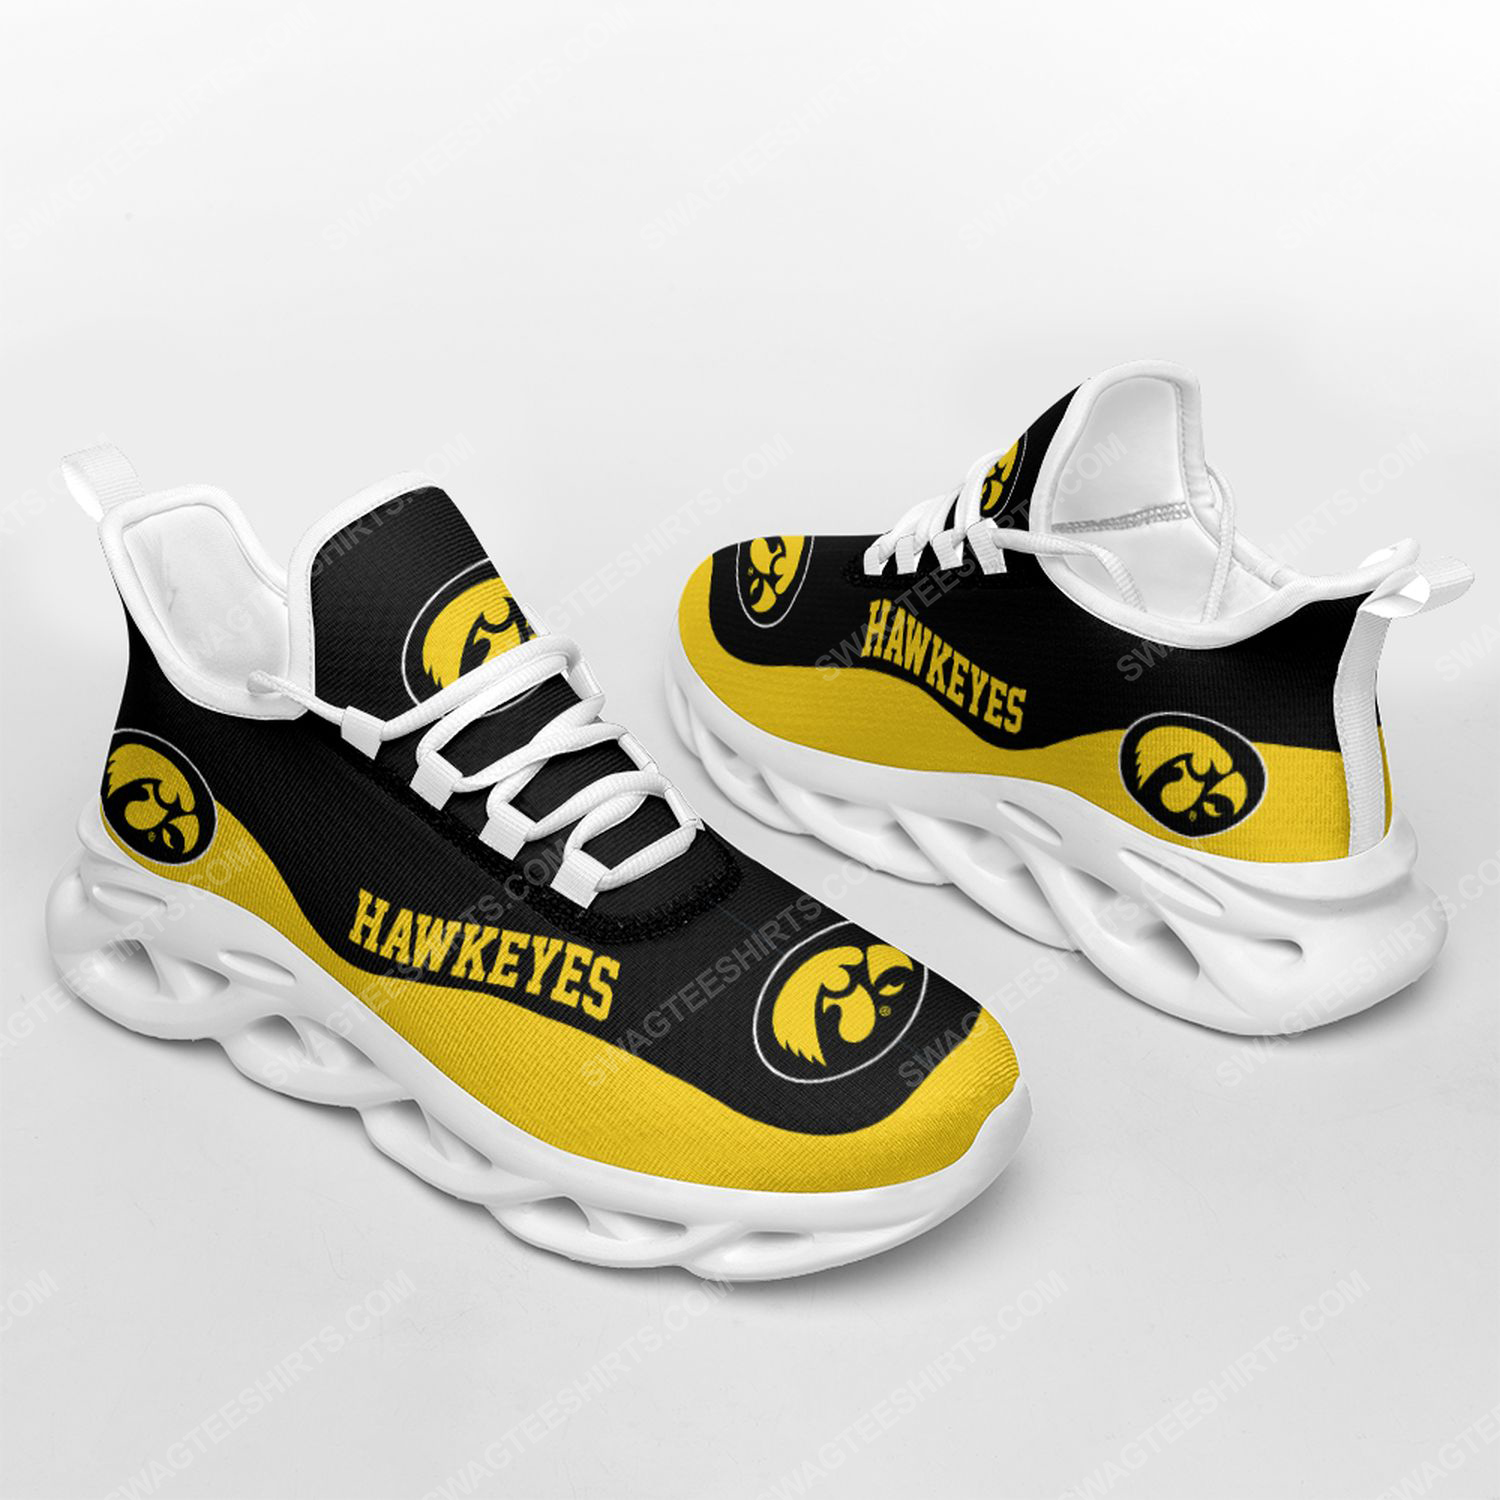 [special edition] The iowa hawkeyes football team max soul shoes – Maria